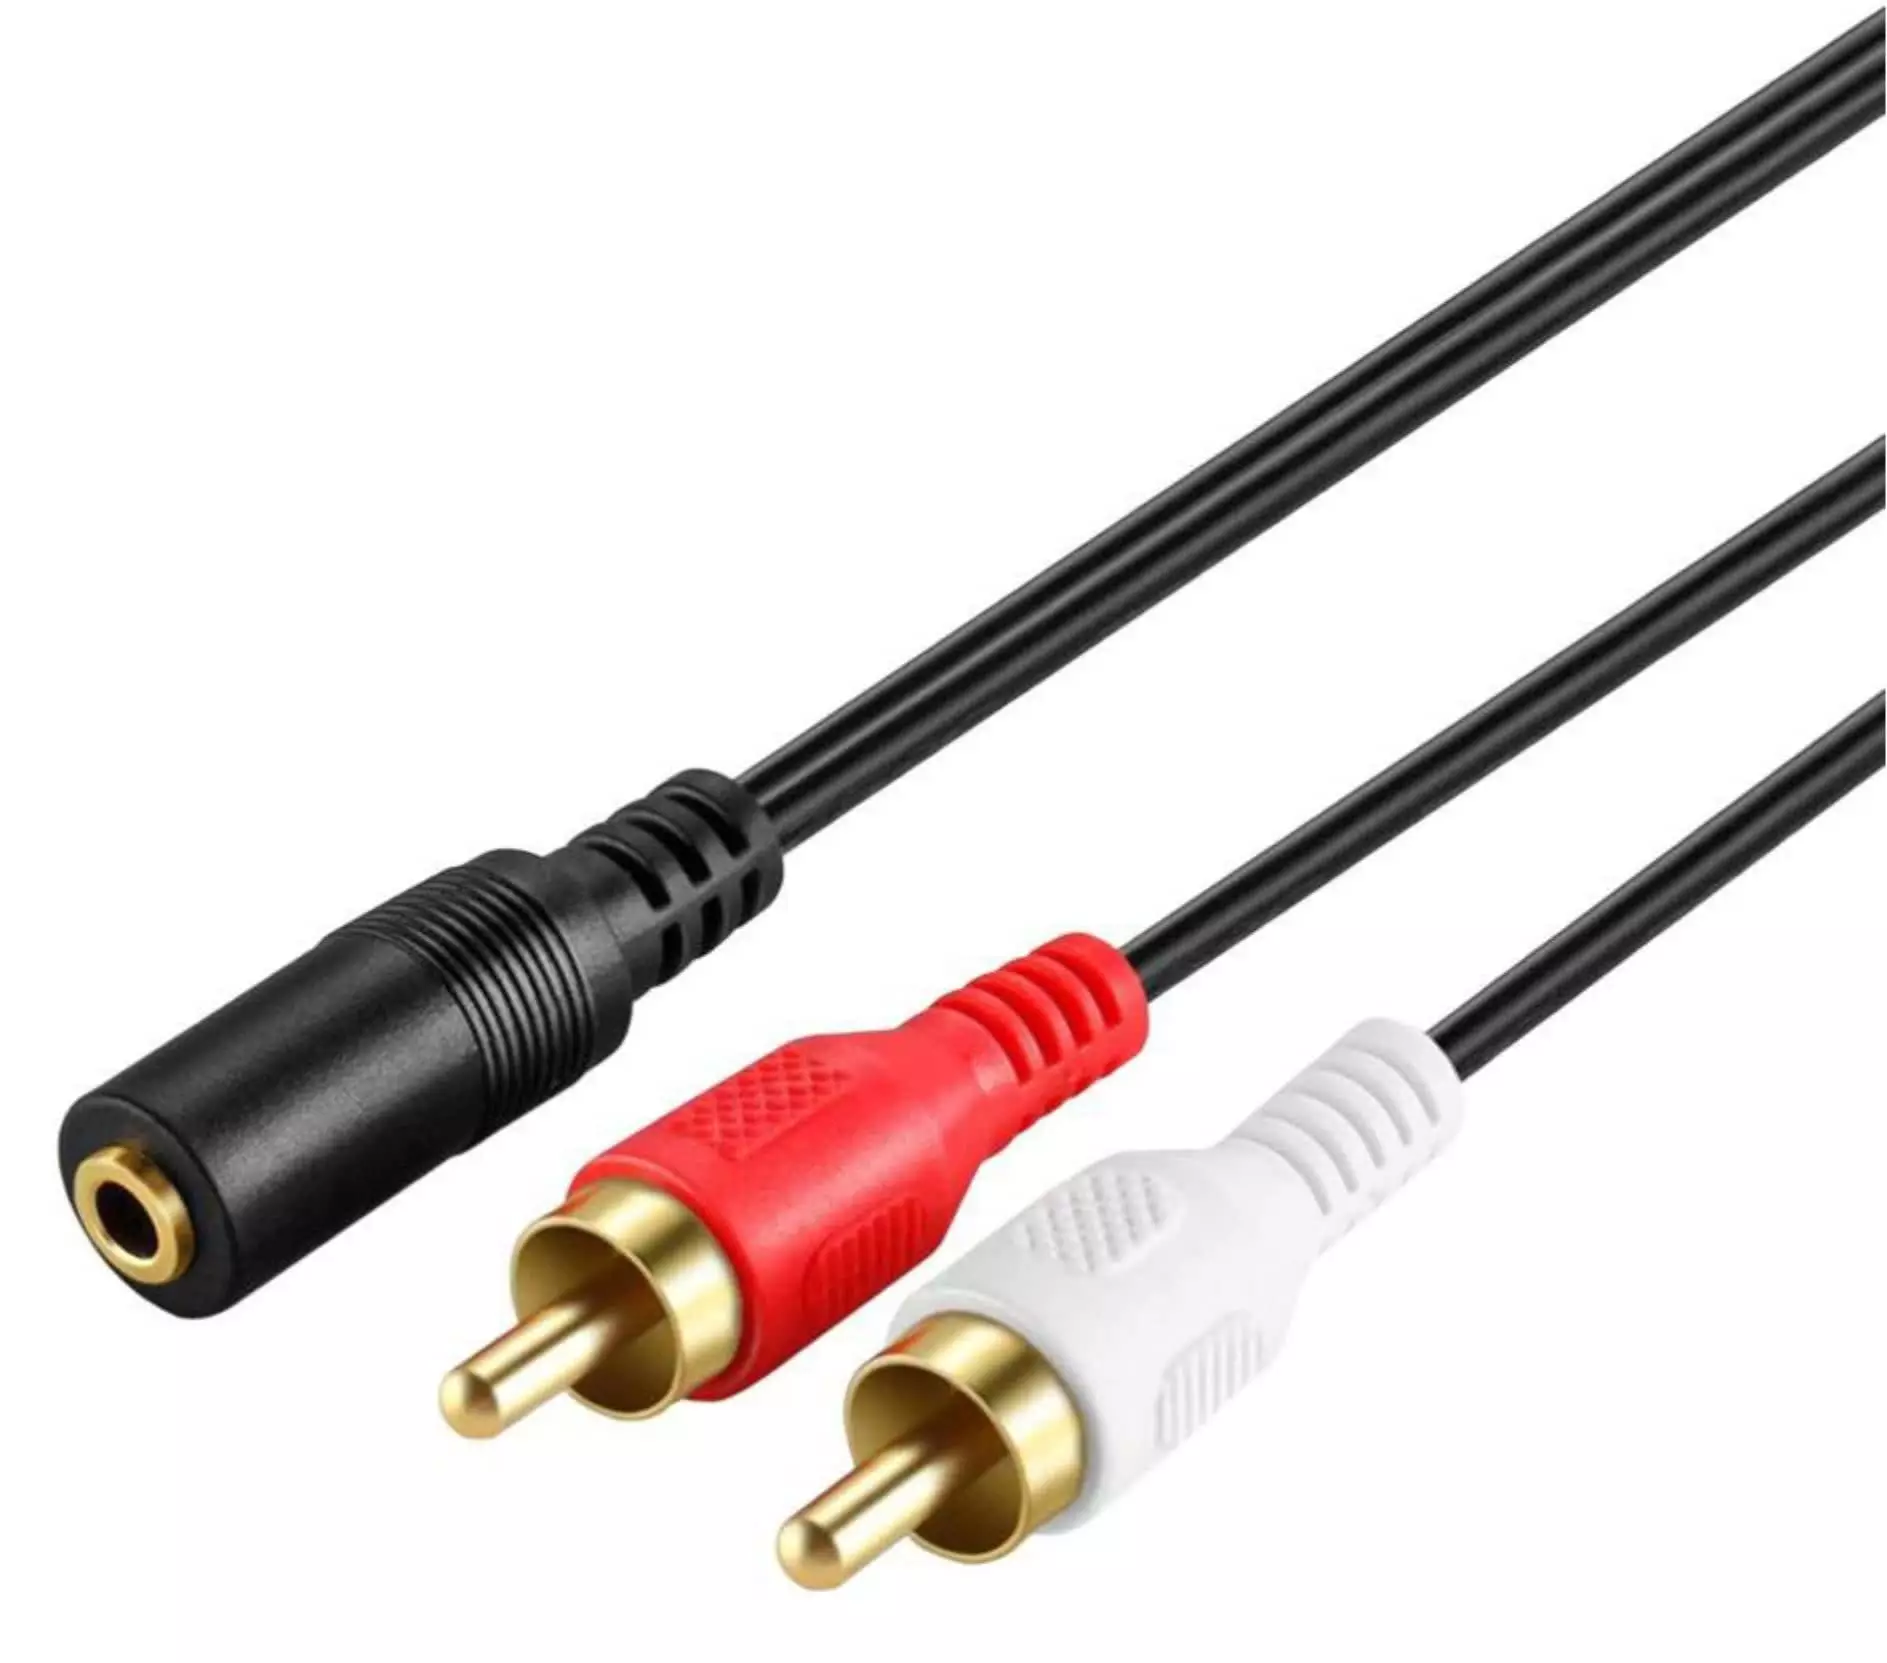 3 Meter Dual RCA (2x) To 3.5mm Female Adapter Cable